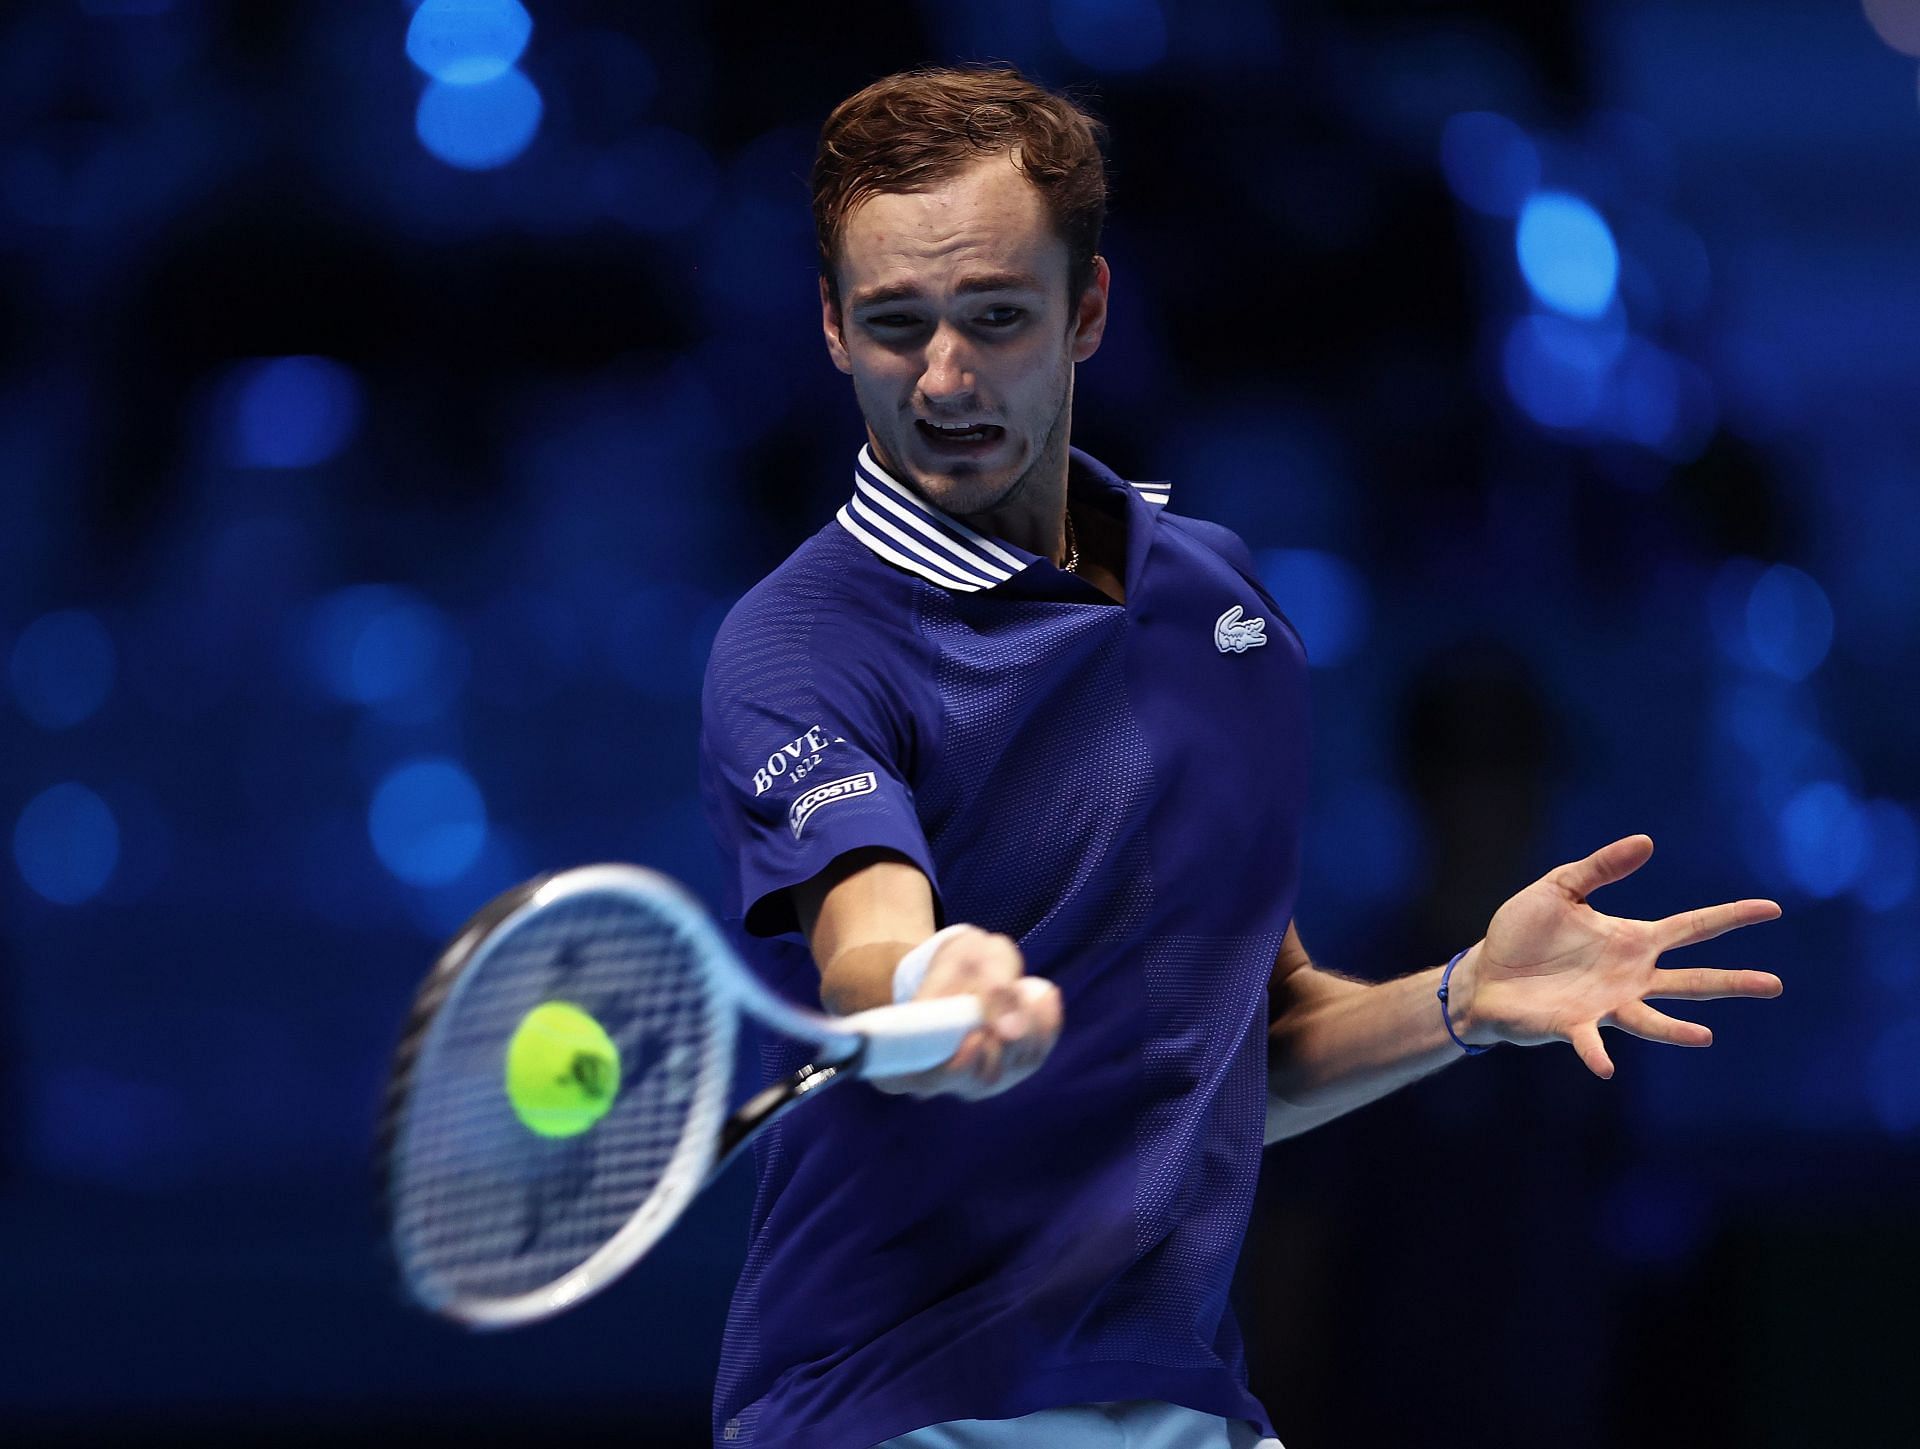 Daniil Medvedev at the Nitto ATP World Tour Finals - Day Three